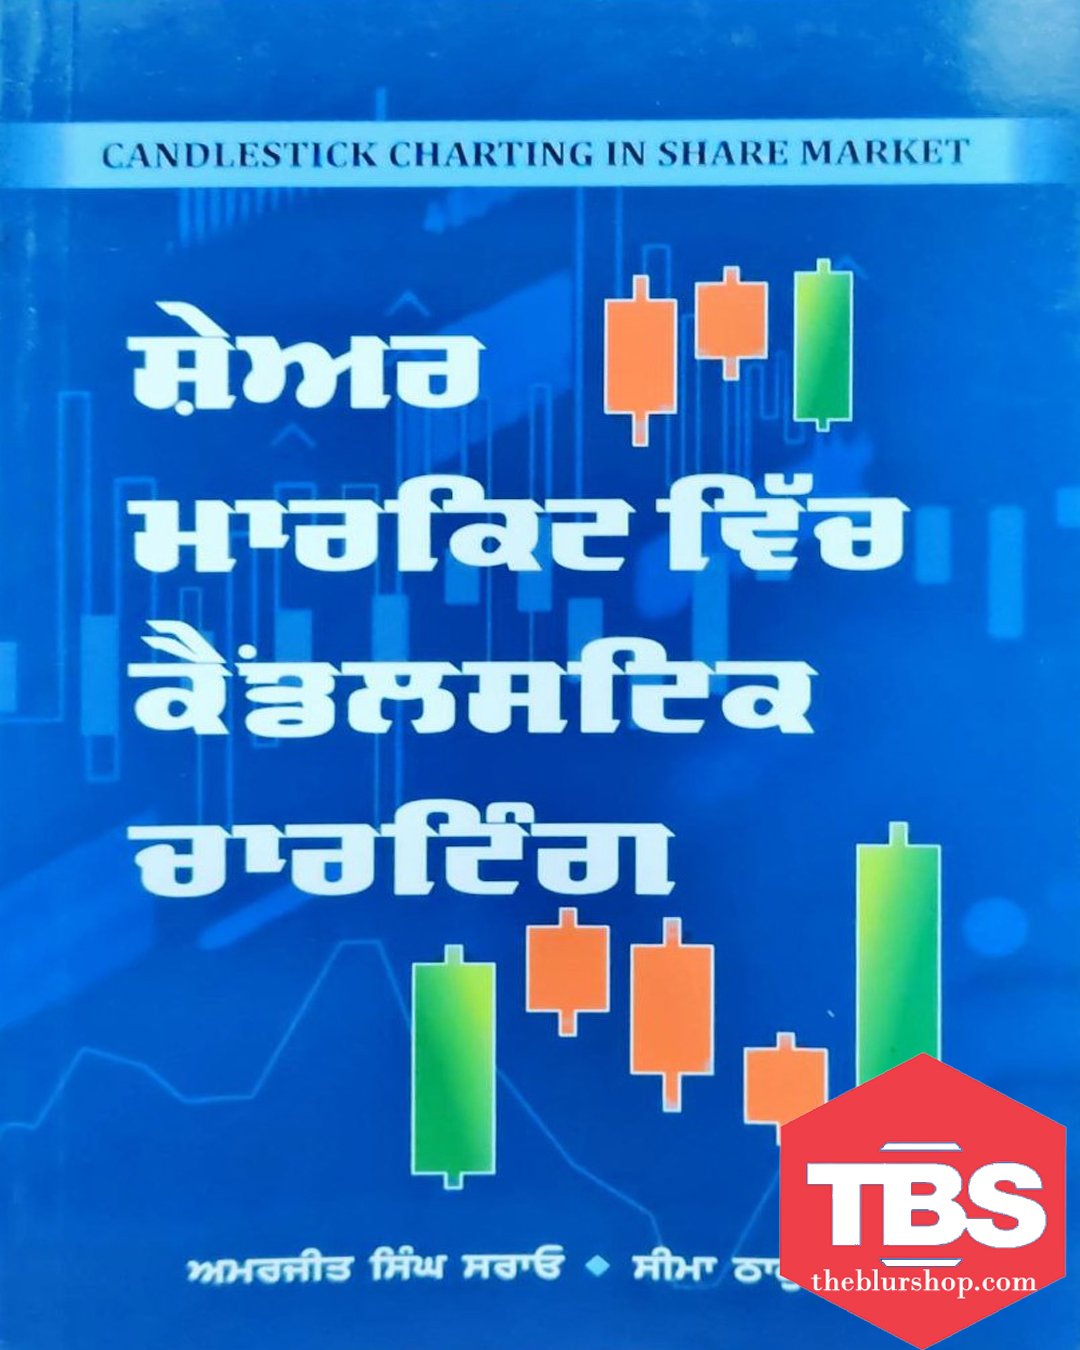 Share Market Vich Candlestick Charting